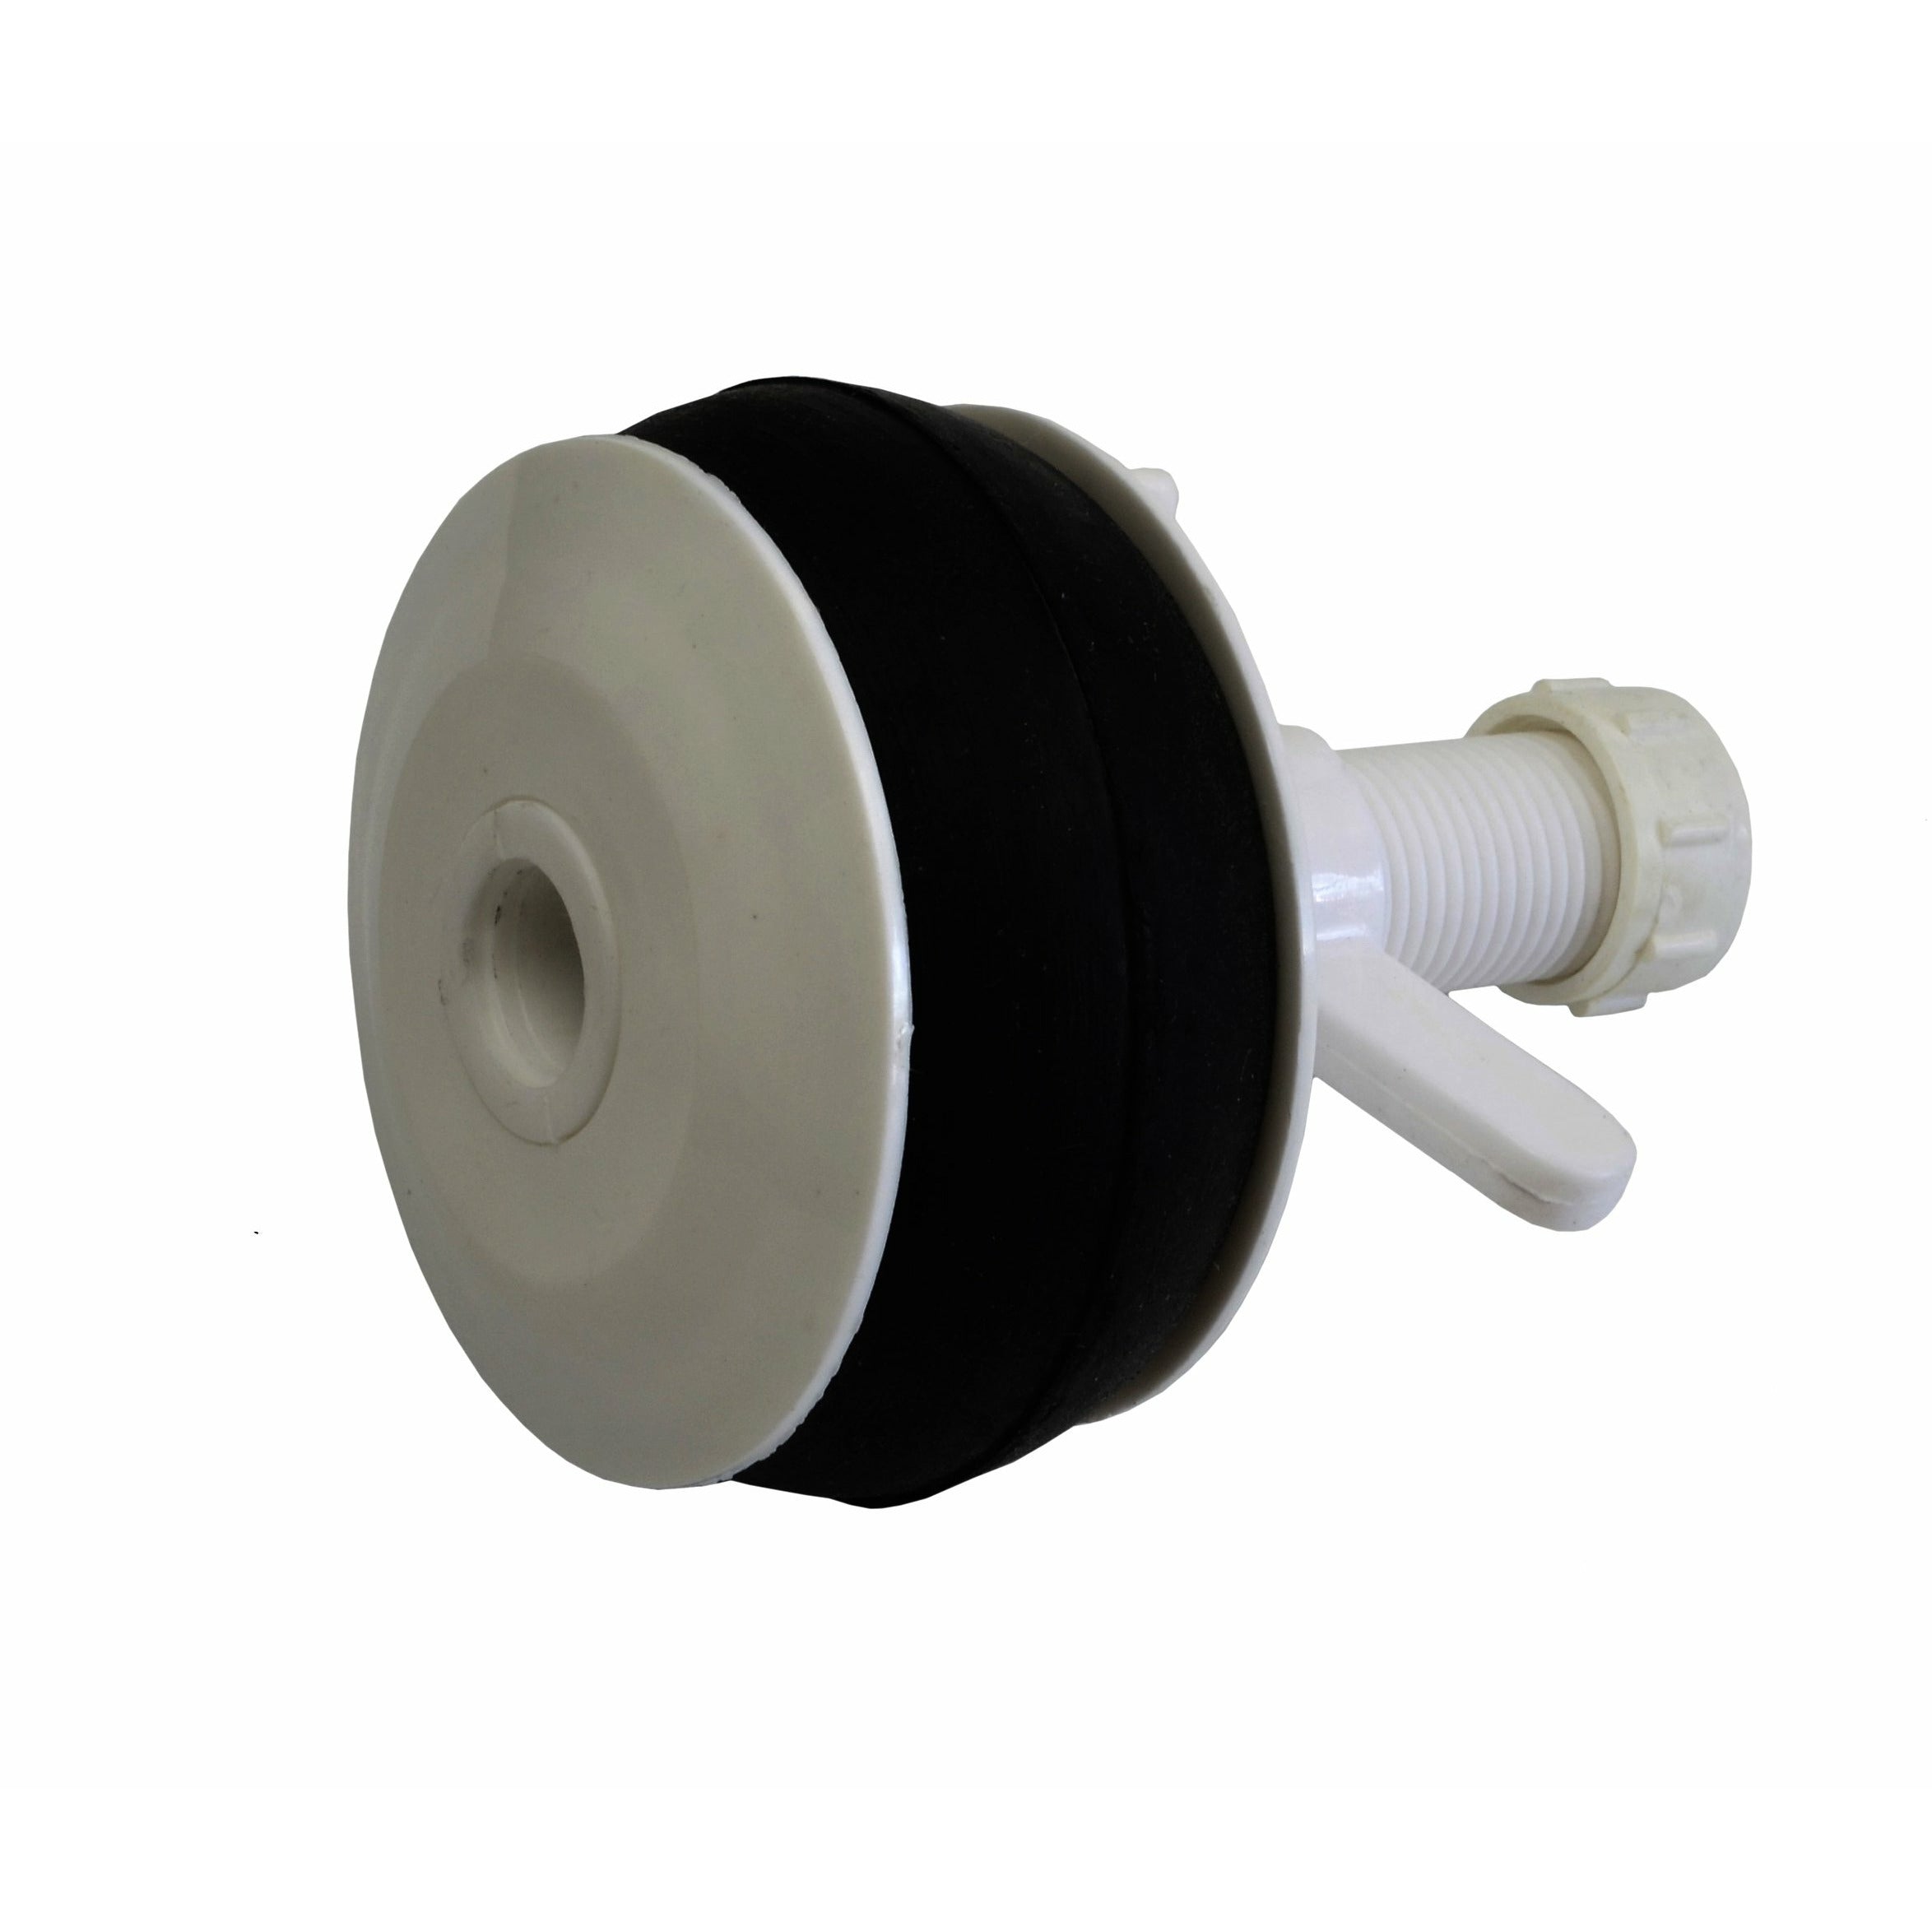 Nylon Mechanical Pipe Test plug bung with 13mm bypass 85mm to 92mm